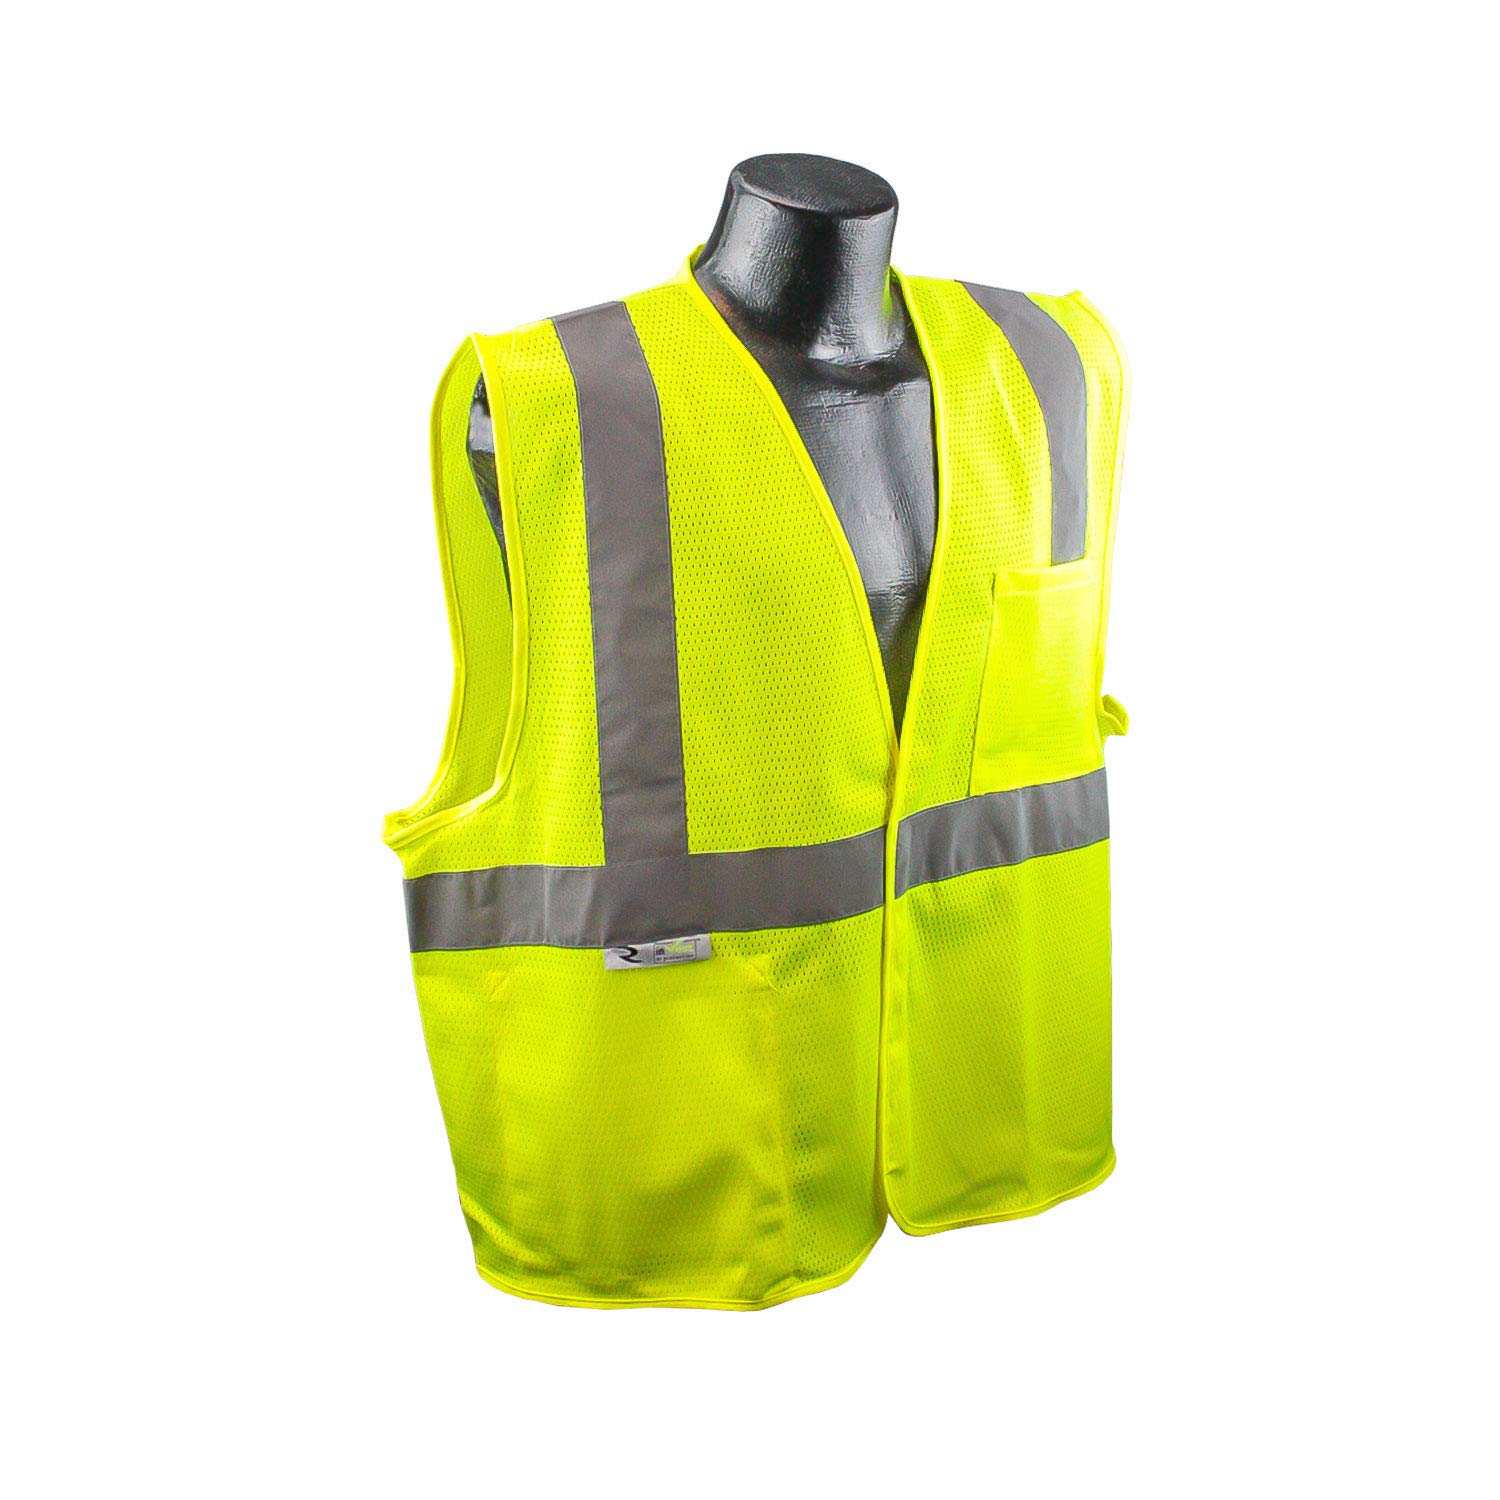 Radians Class 2 Mesh Safety Vest, Safety Green, 3X-Large $0.98 + Free Shipping w/ Prime or on $35+